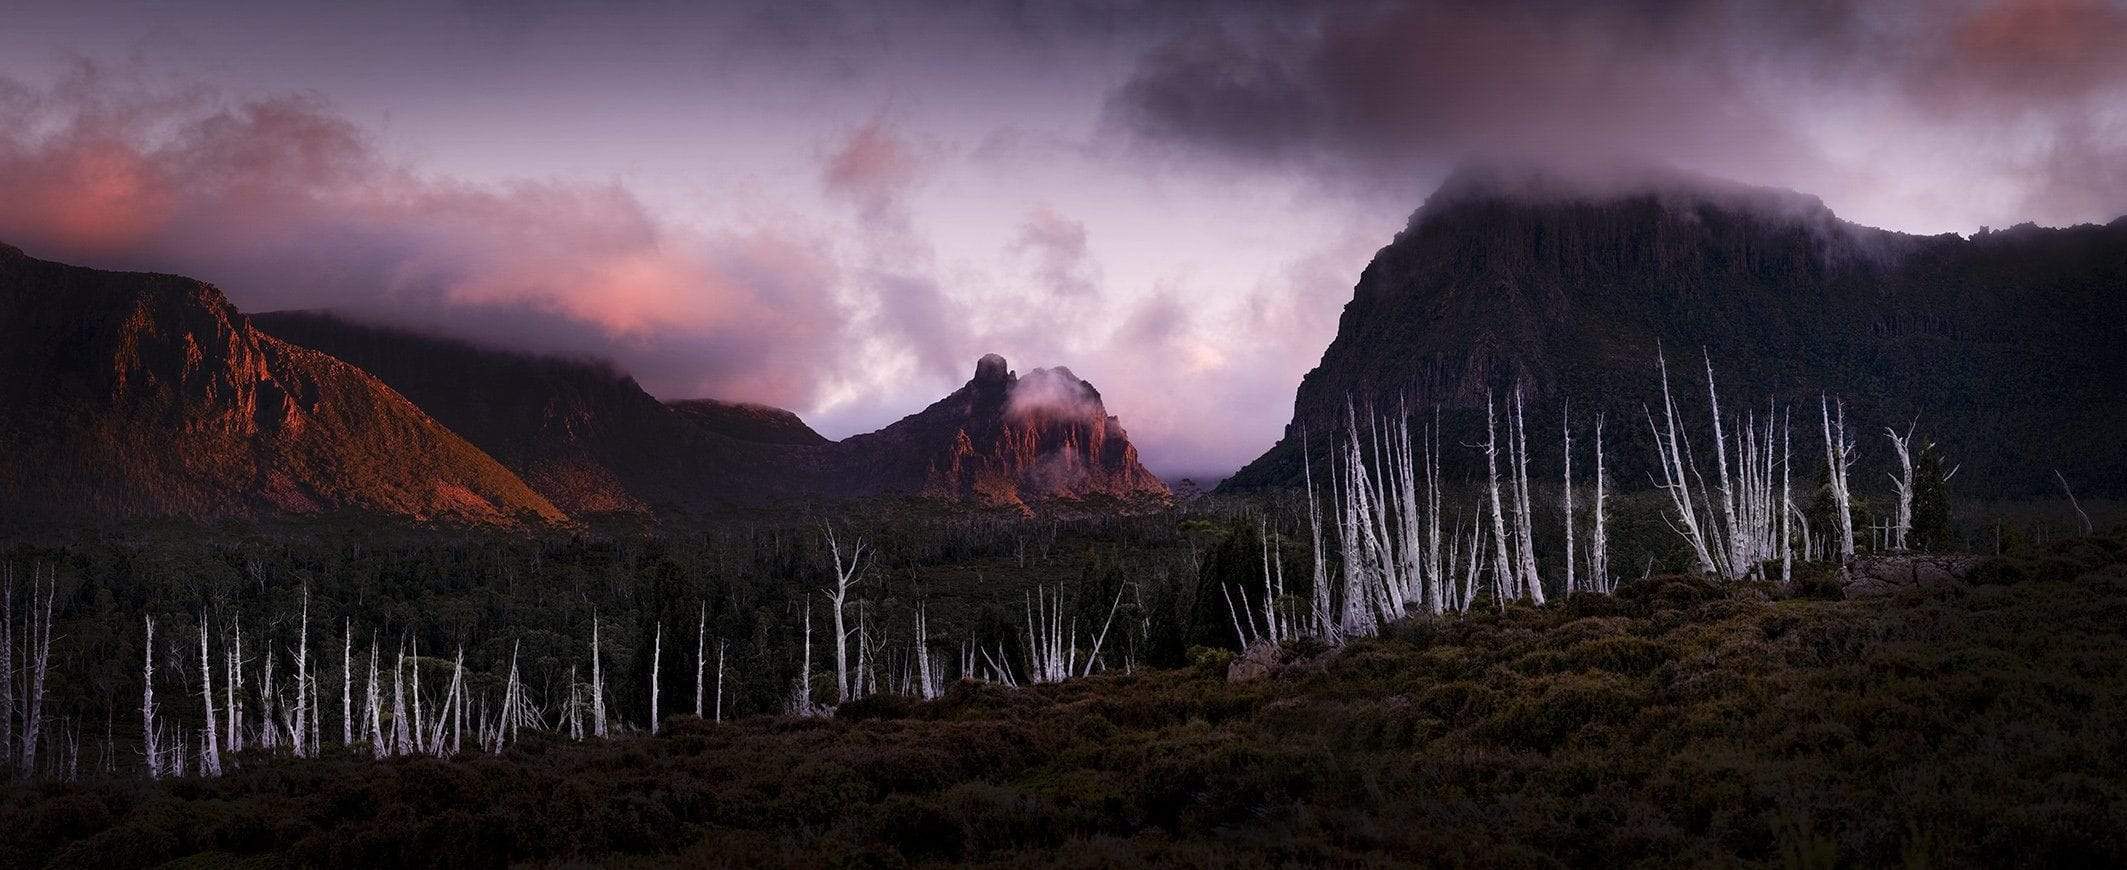 Dark vire of giant mountains with smoky effect over, Pelion Gap - Cradle Mountain TAS